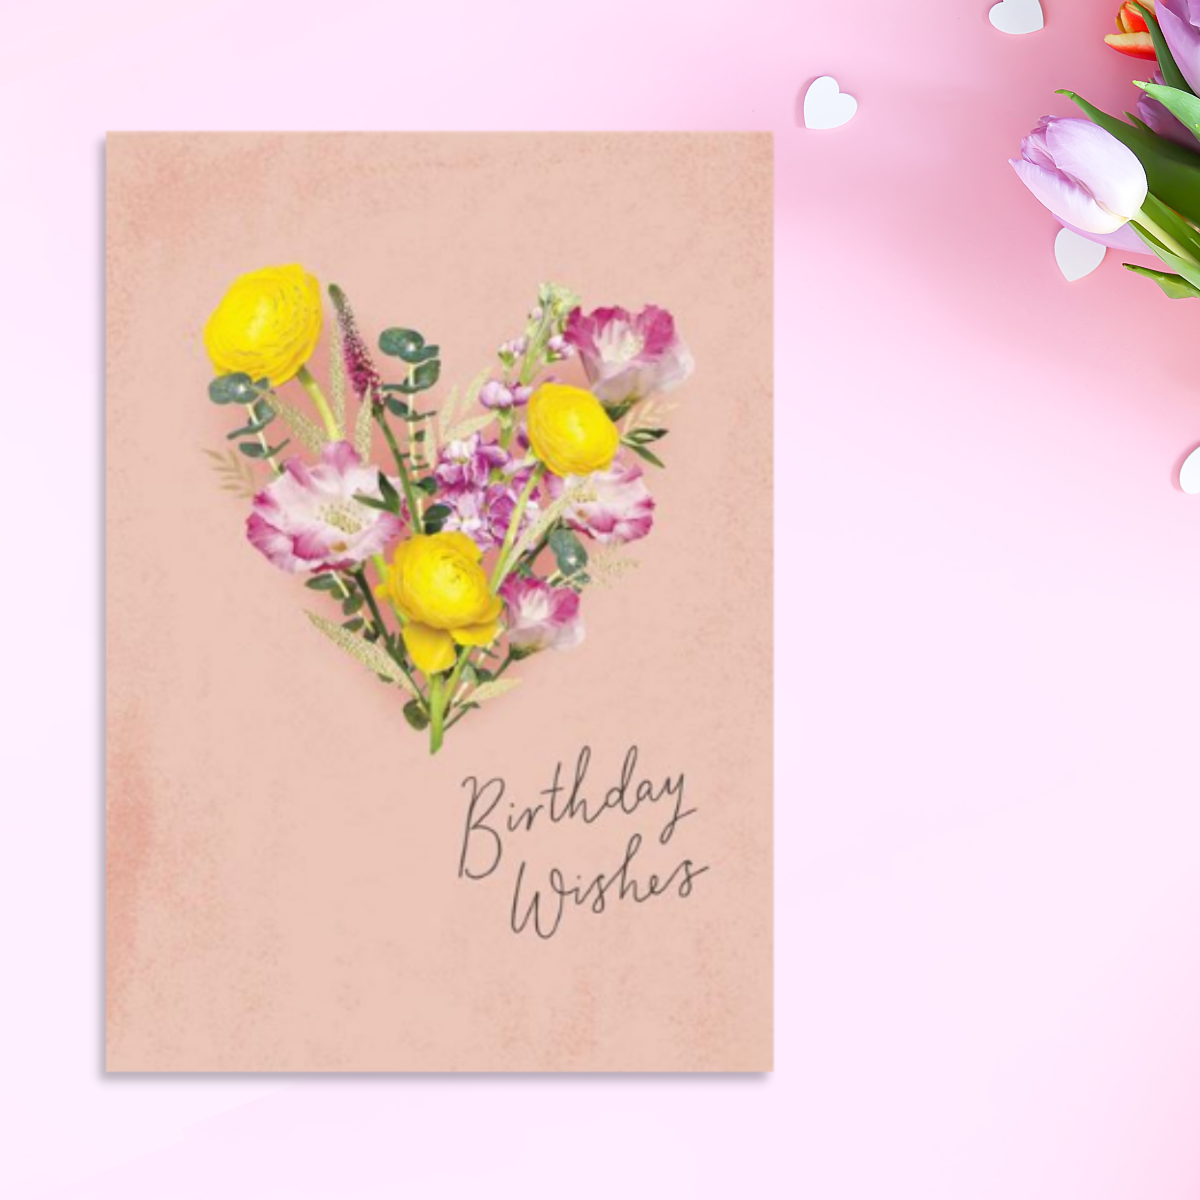 Peach card with floral heart laid out